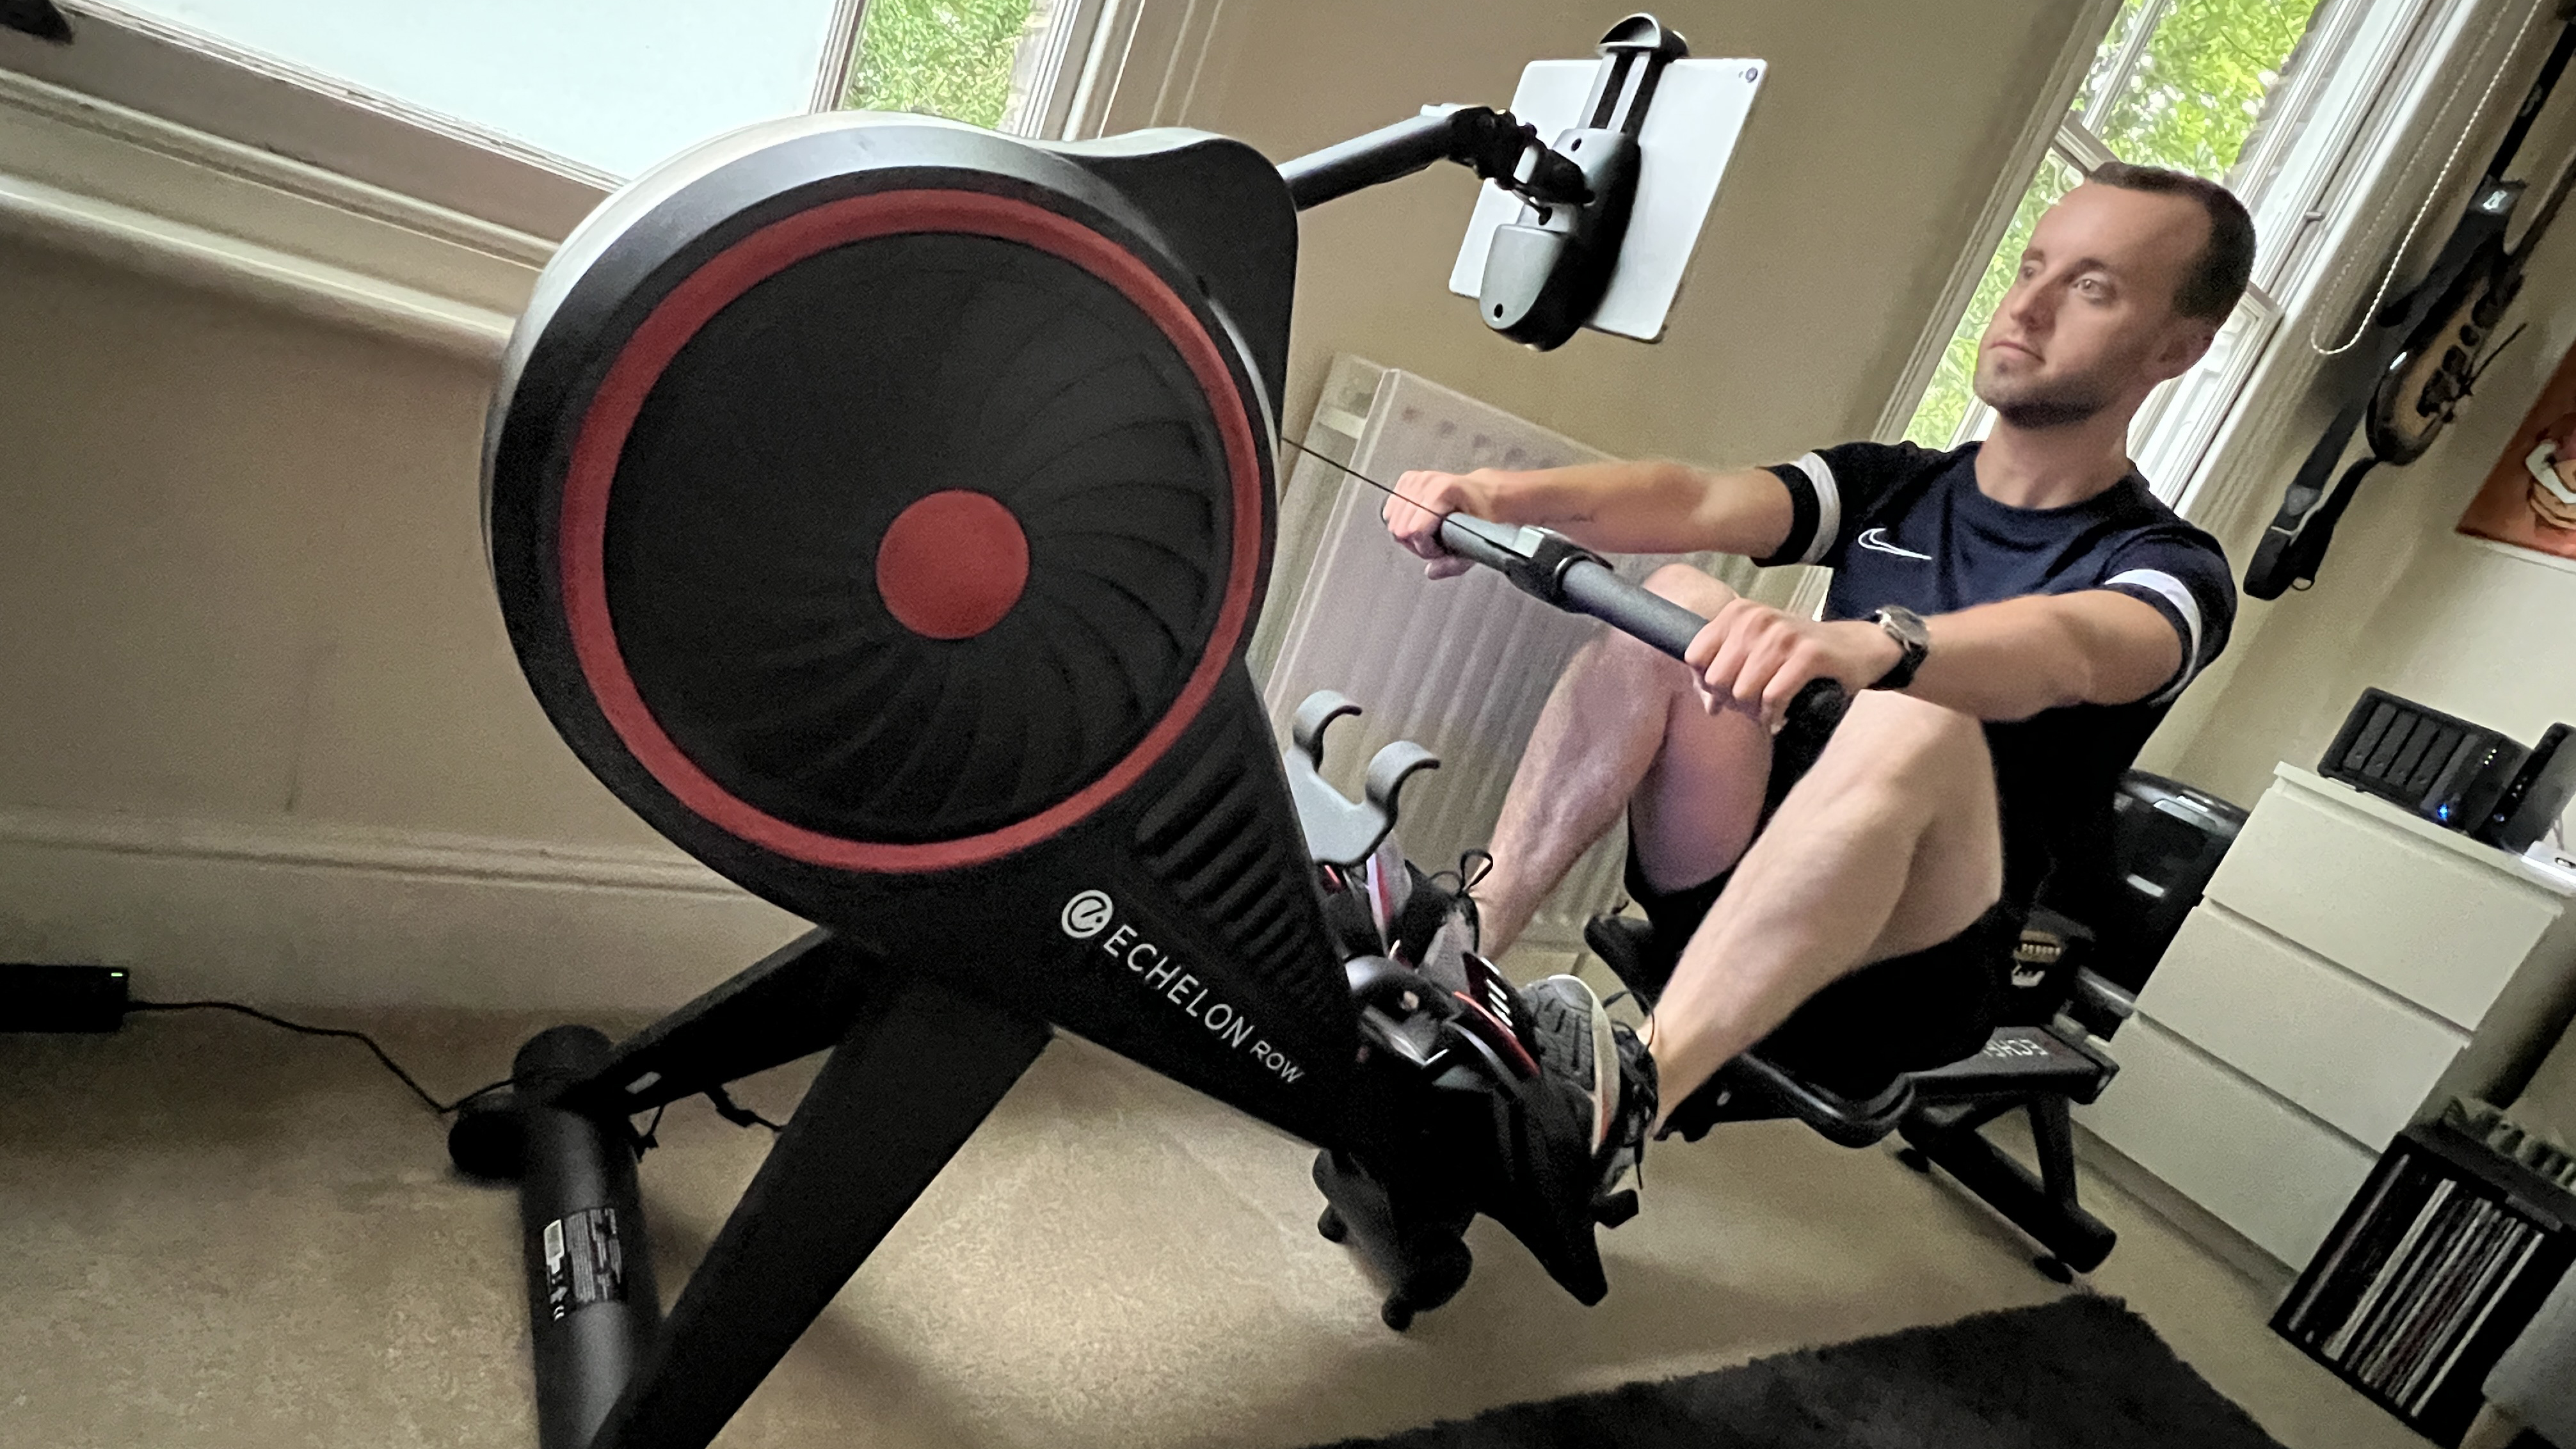 Echelon Smart Rower is being tested for Live Science